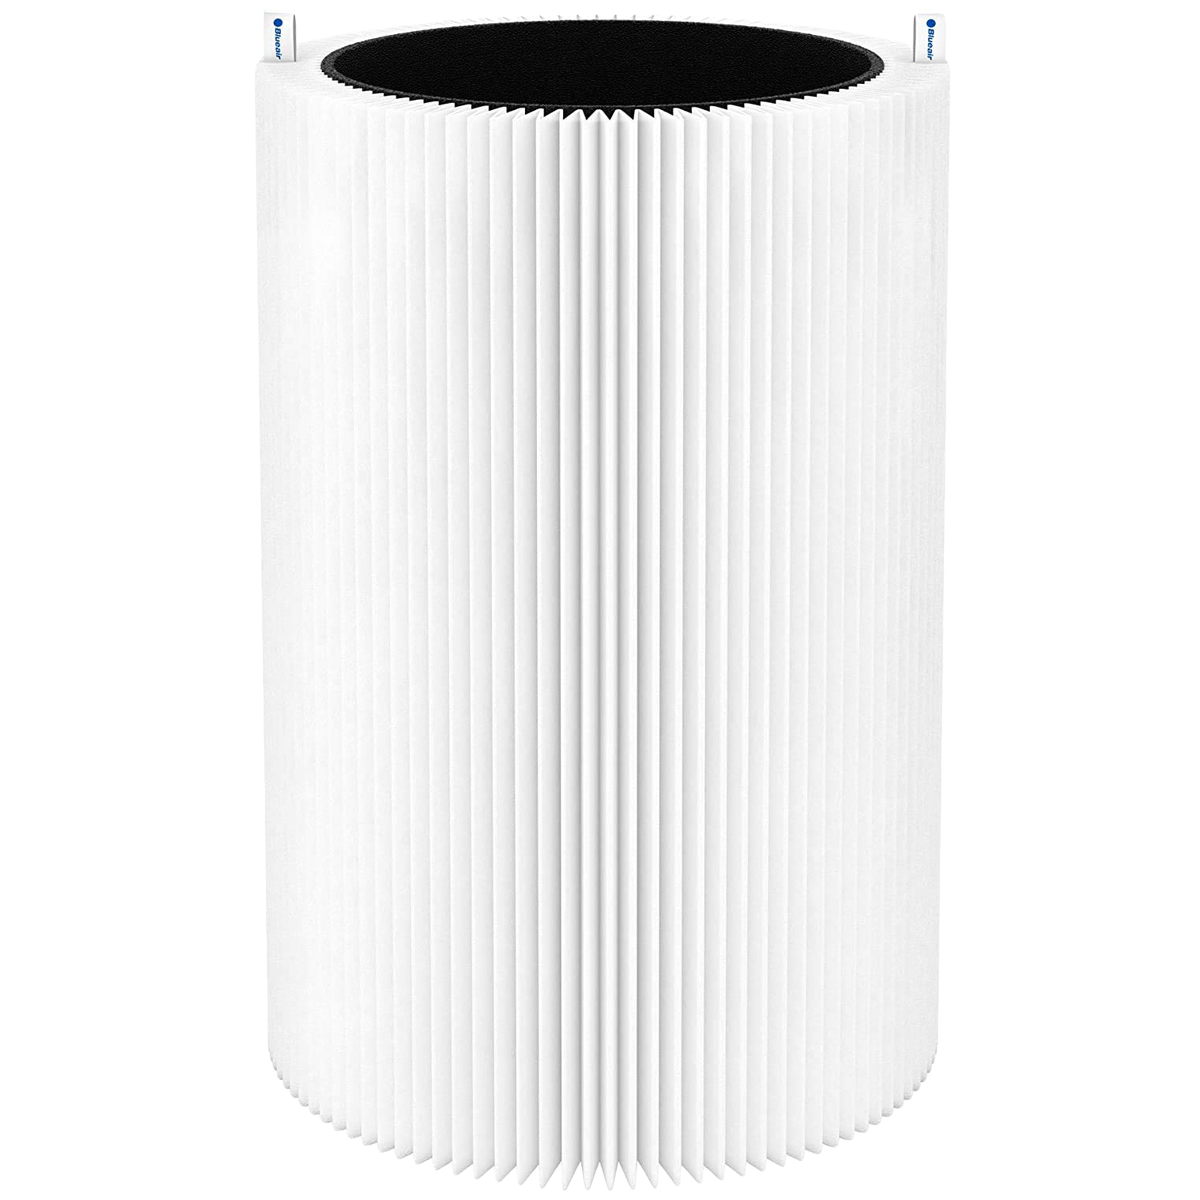 Blueair Replacement Filter For Air Purifier (Remove Allergens and Germs, 104097, White)_1